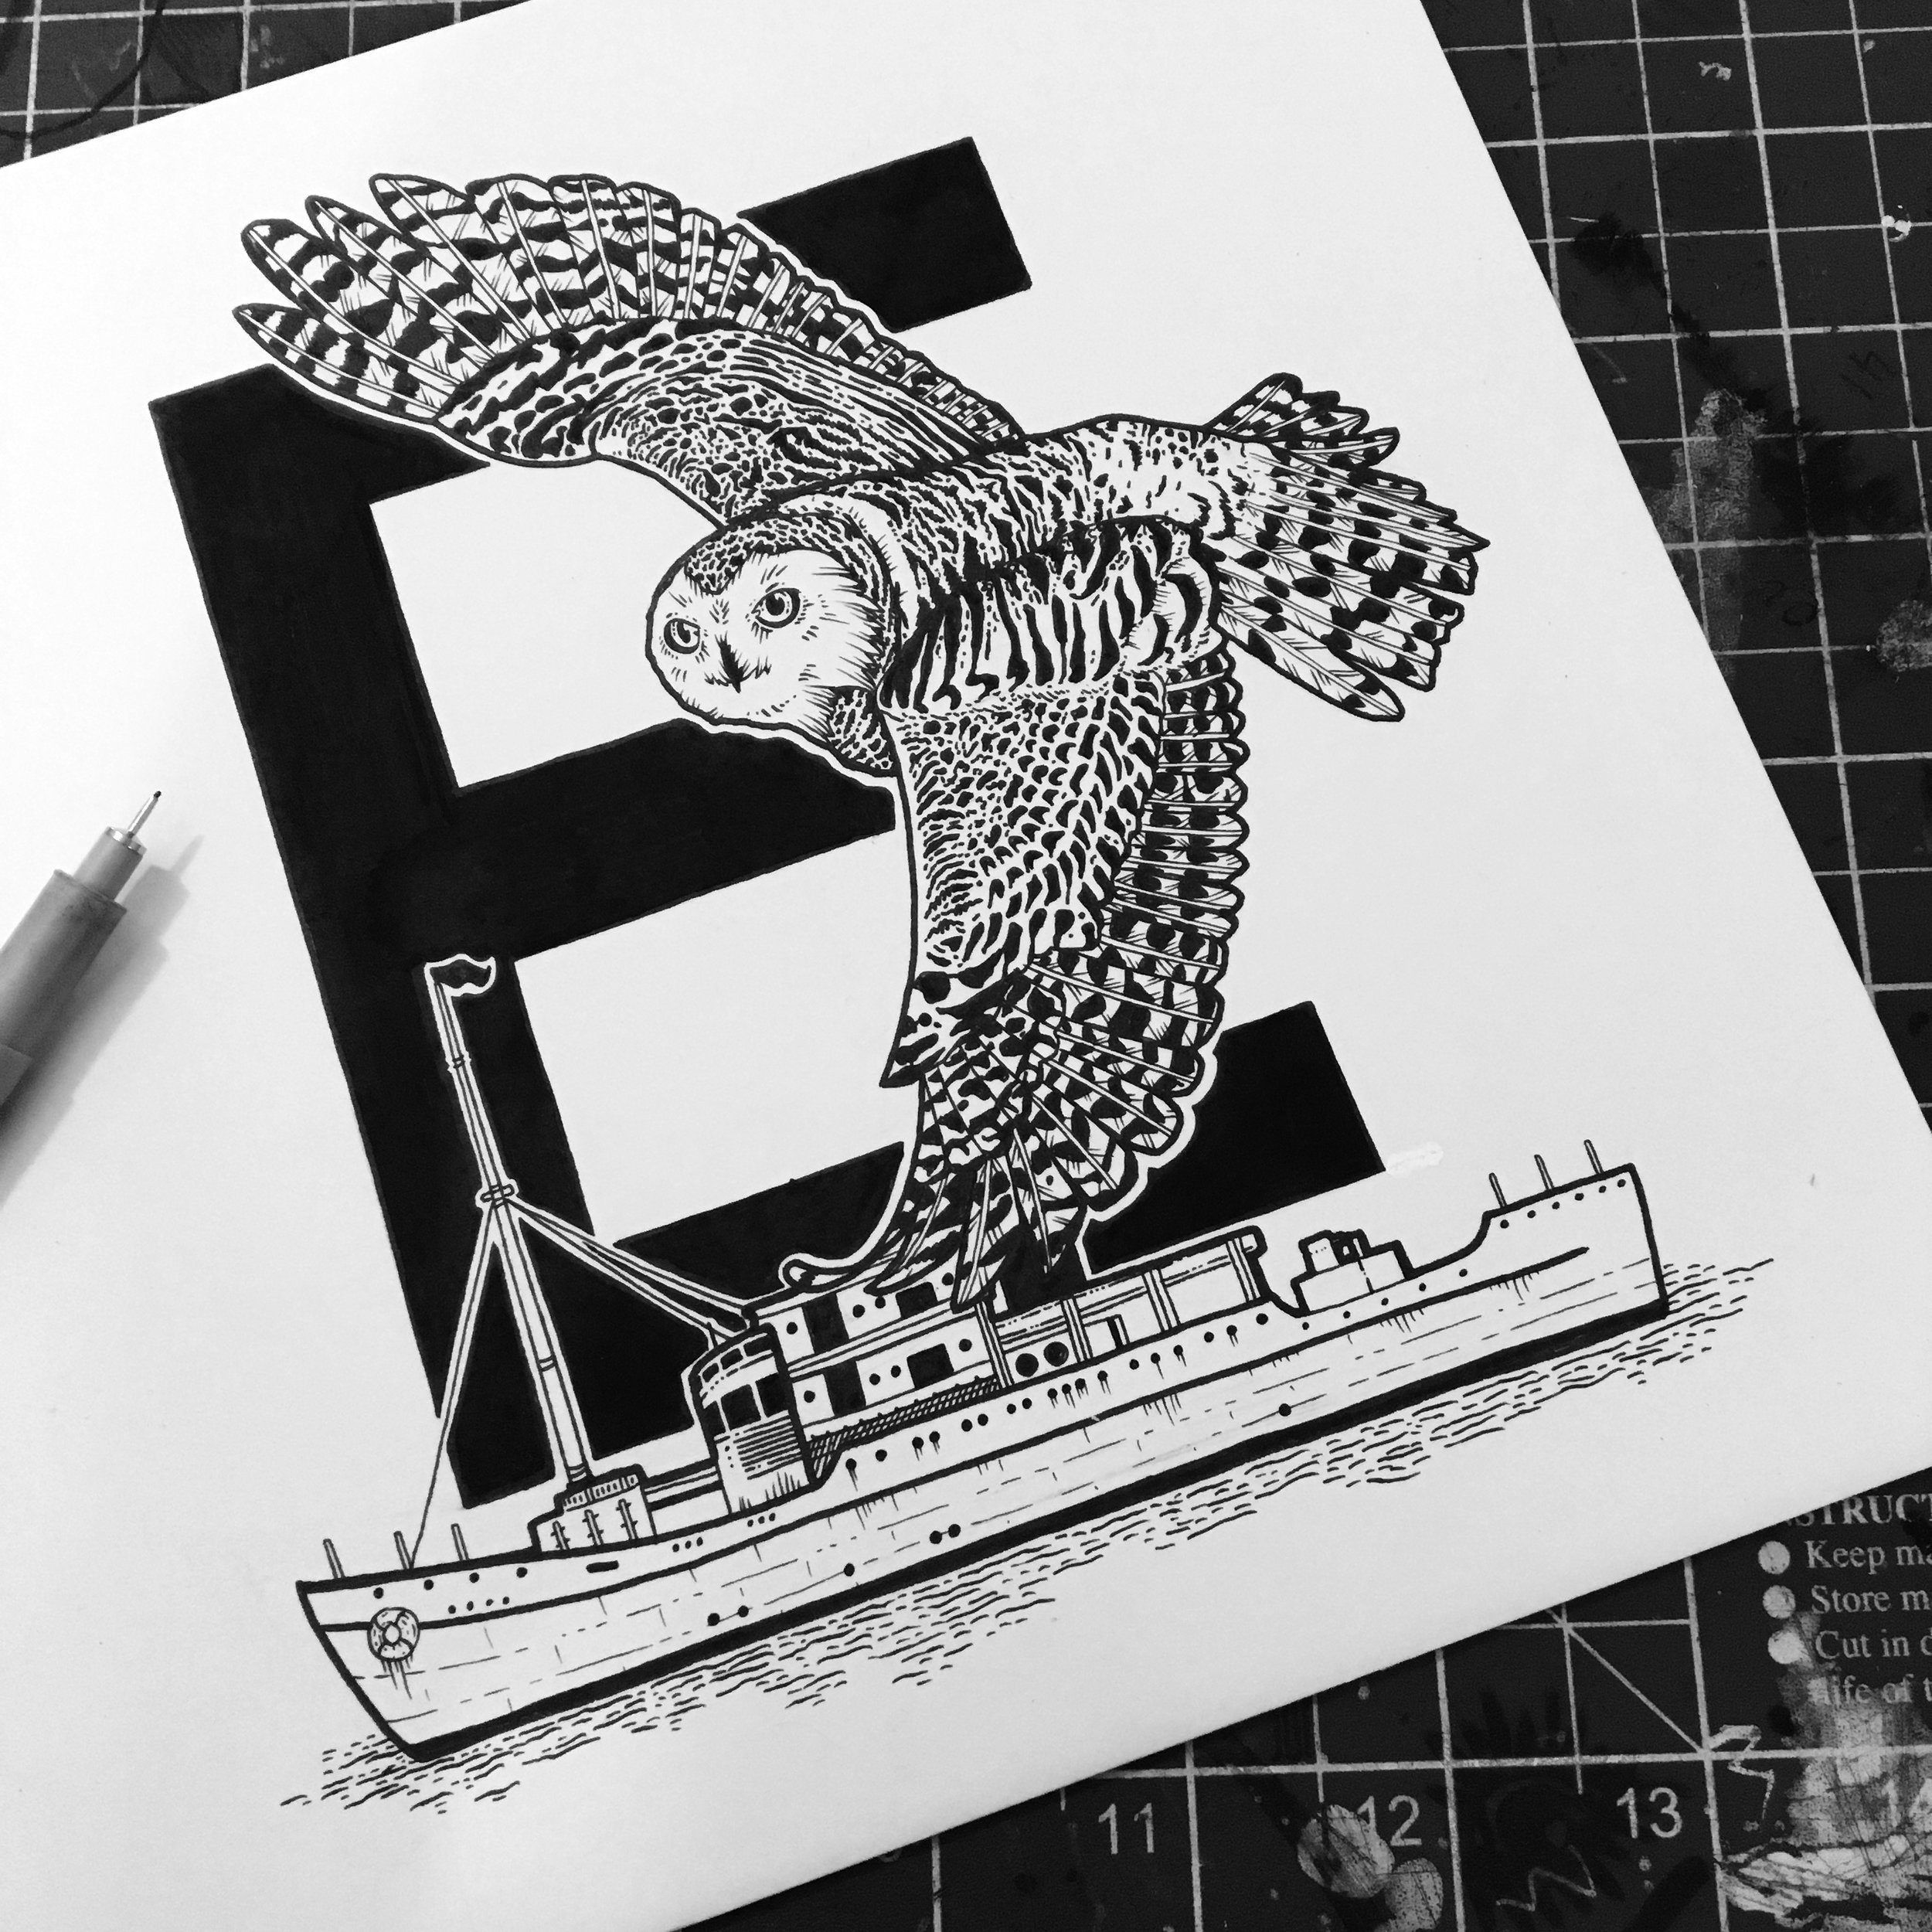  Eros the Snowy Owl - in 1950 he became exhausted and fell on the deck of HMS Eros off the Azores.  